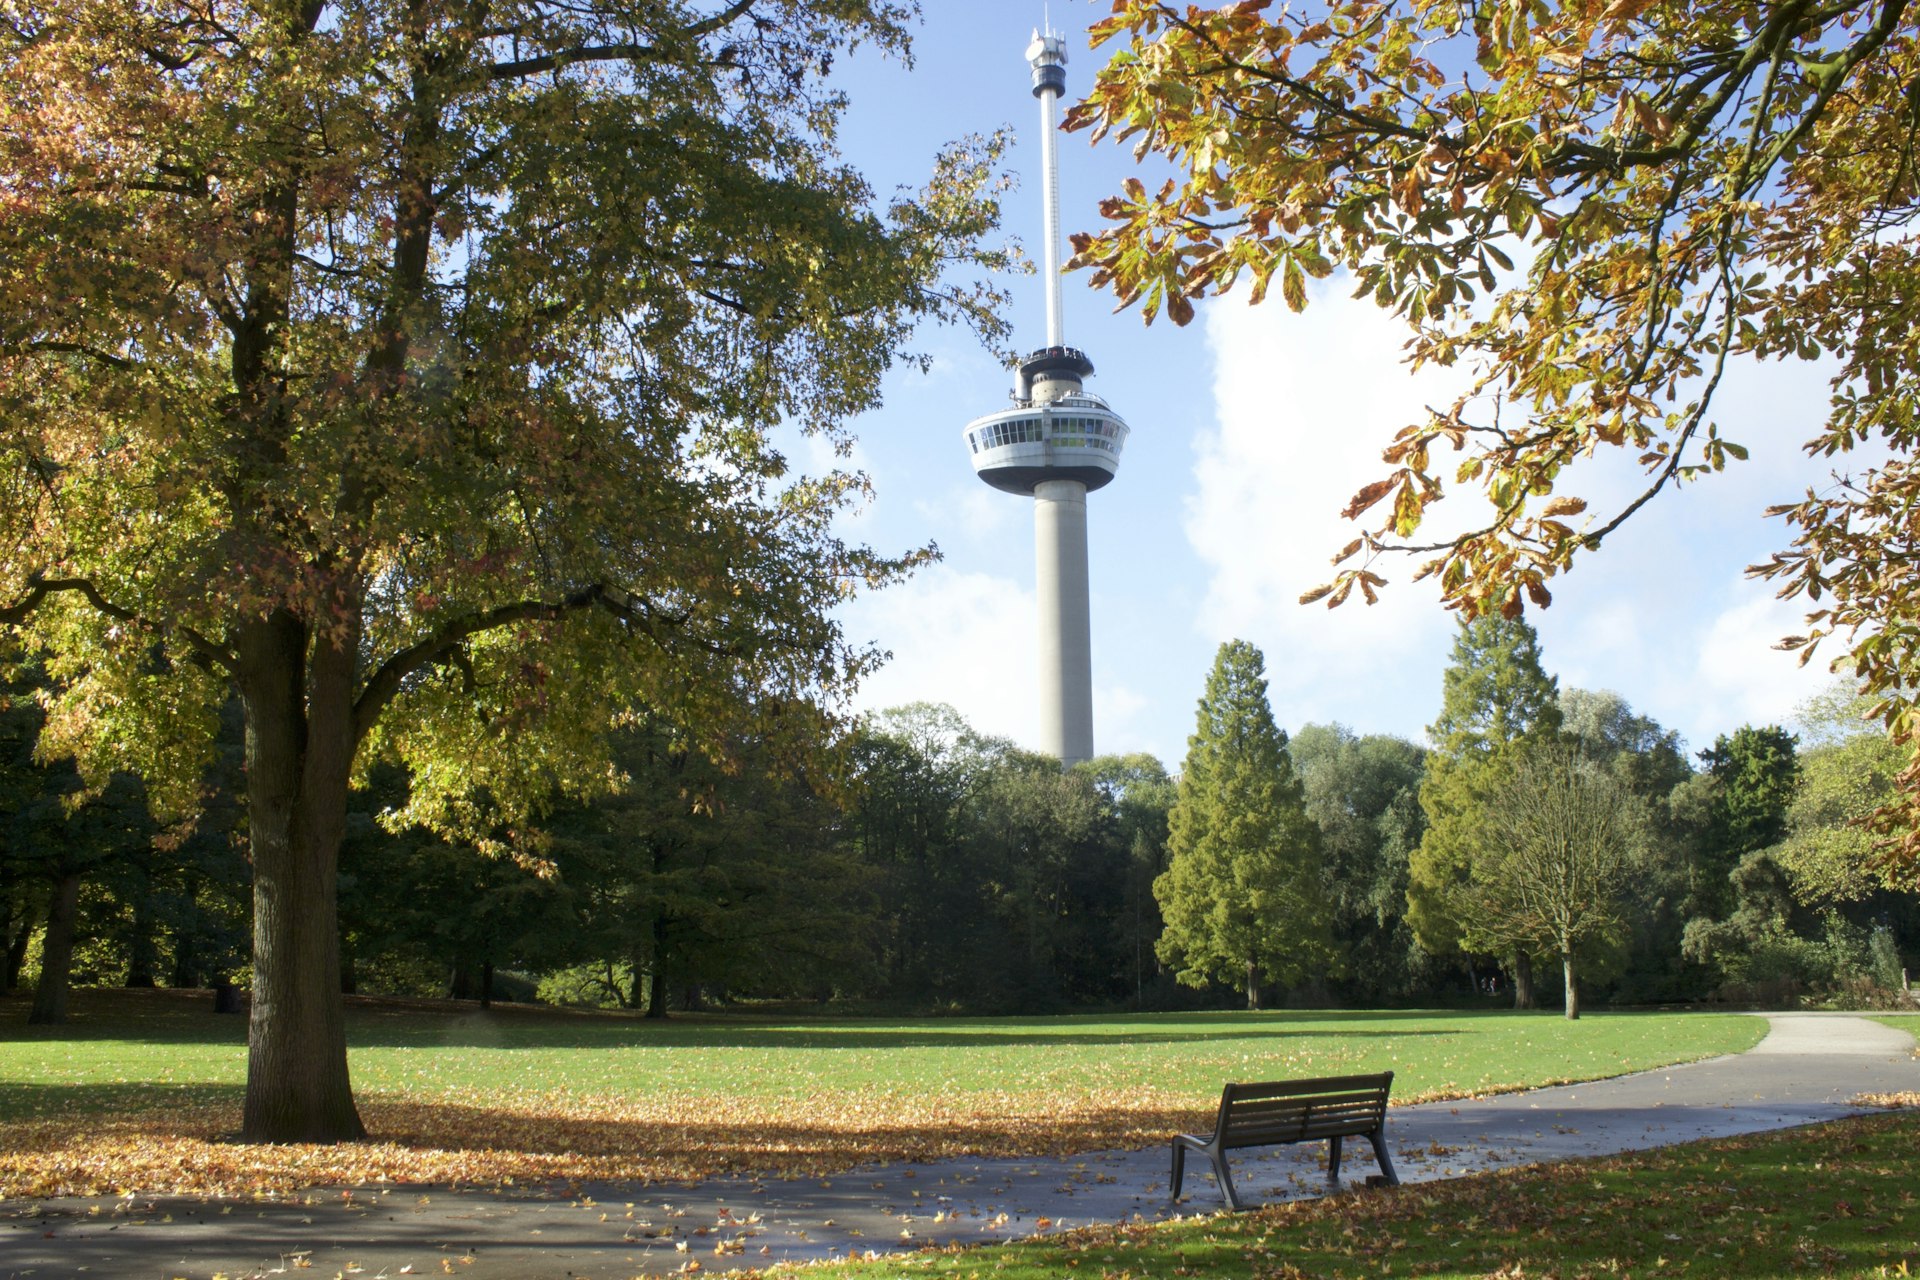 A large green space with a tall tower overlooking it